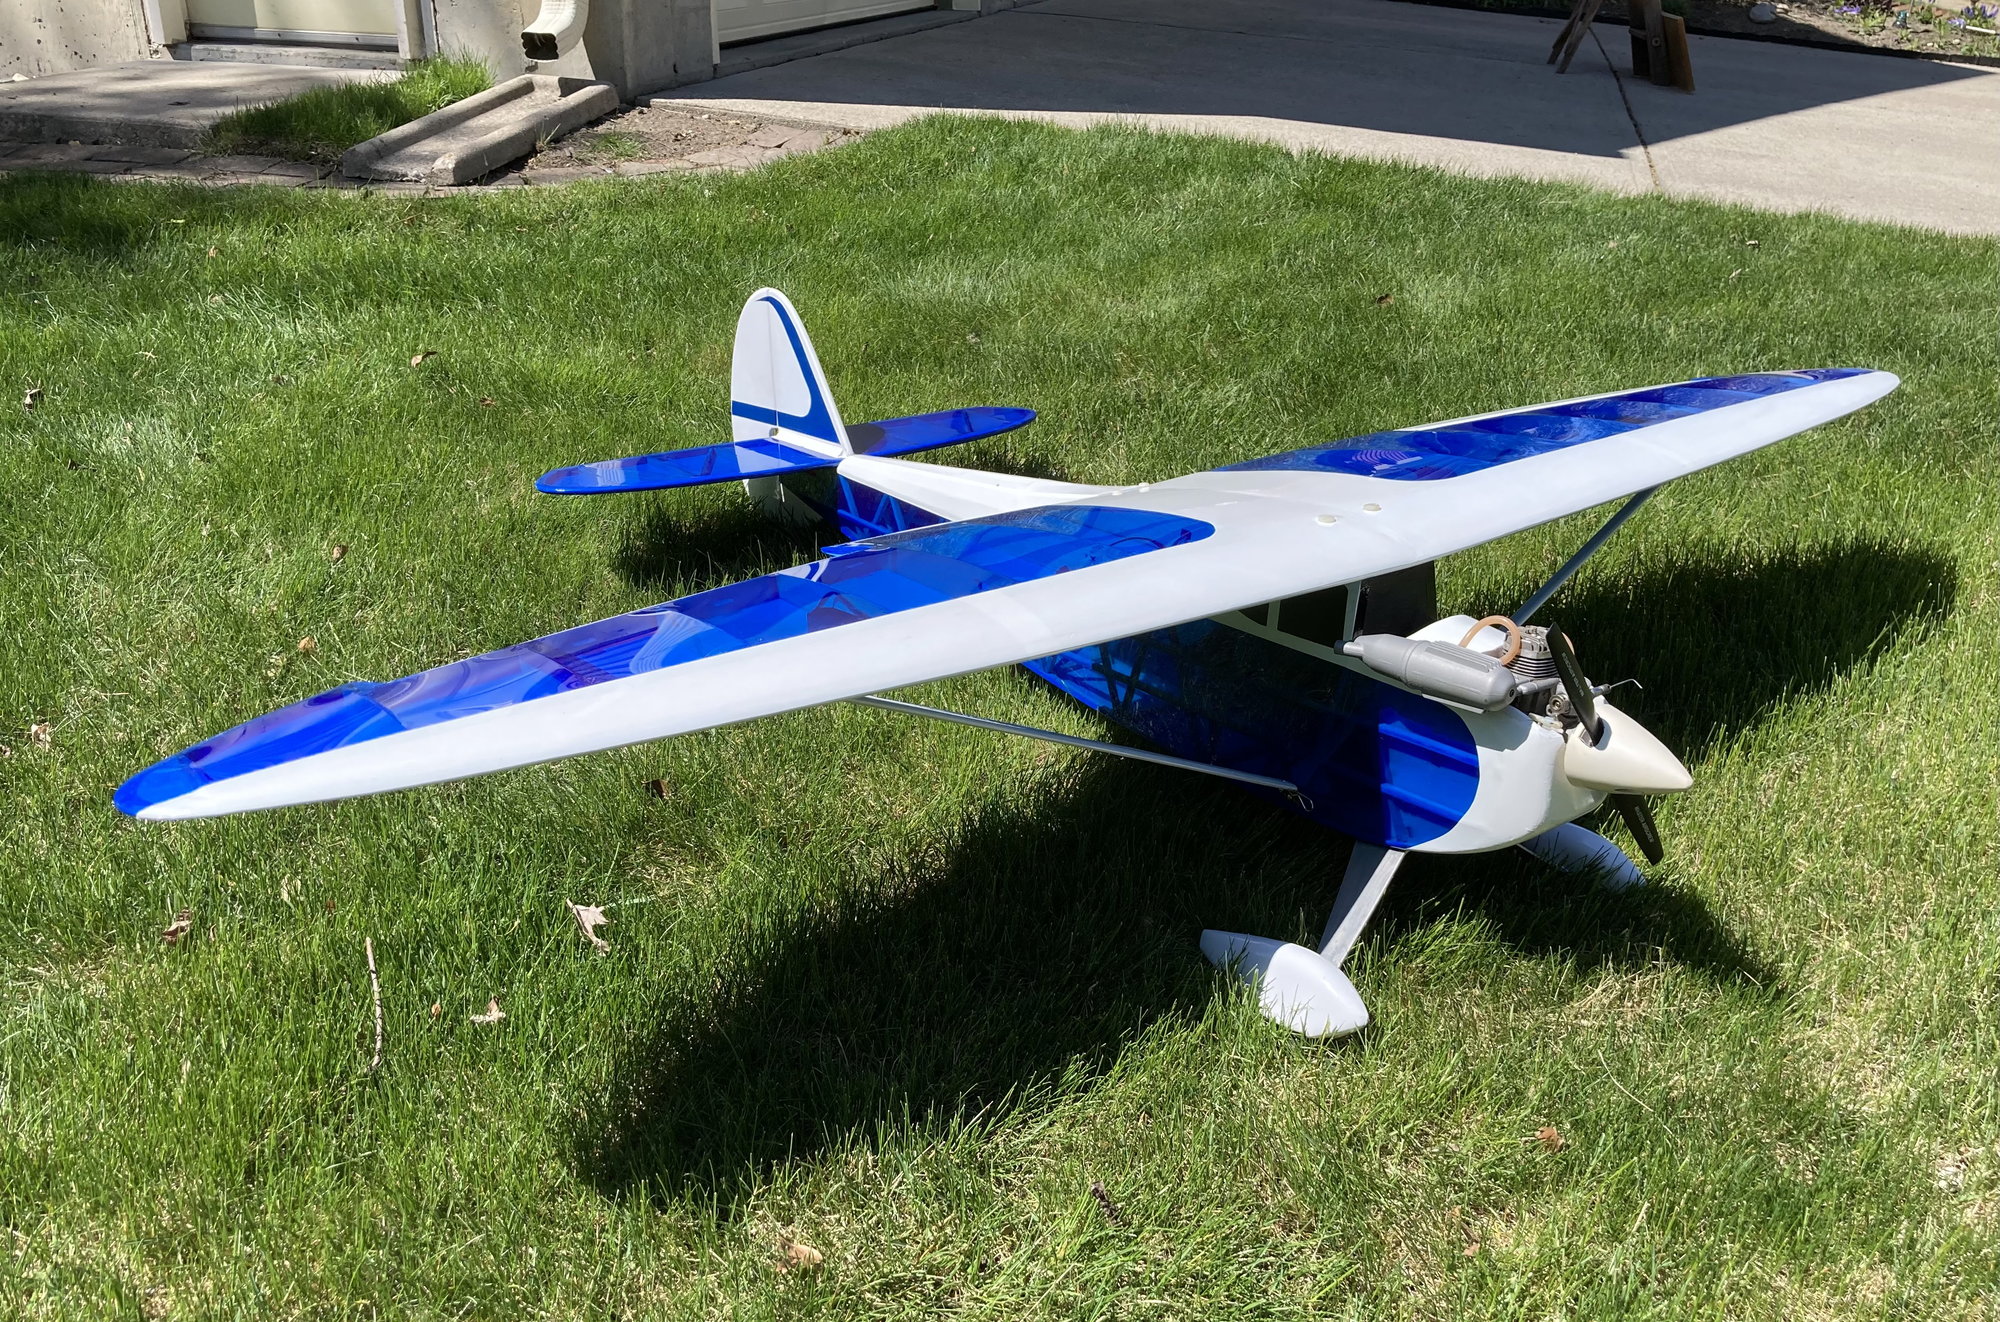 New Cloud Clipper by ValuePlanes. - RCU Forums